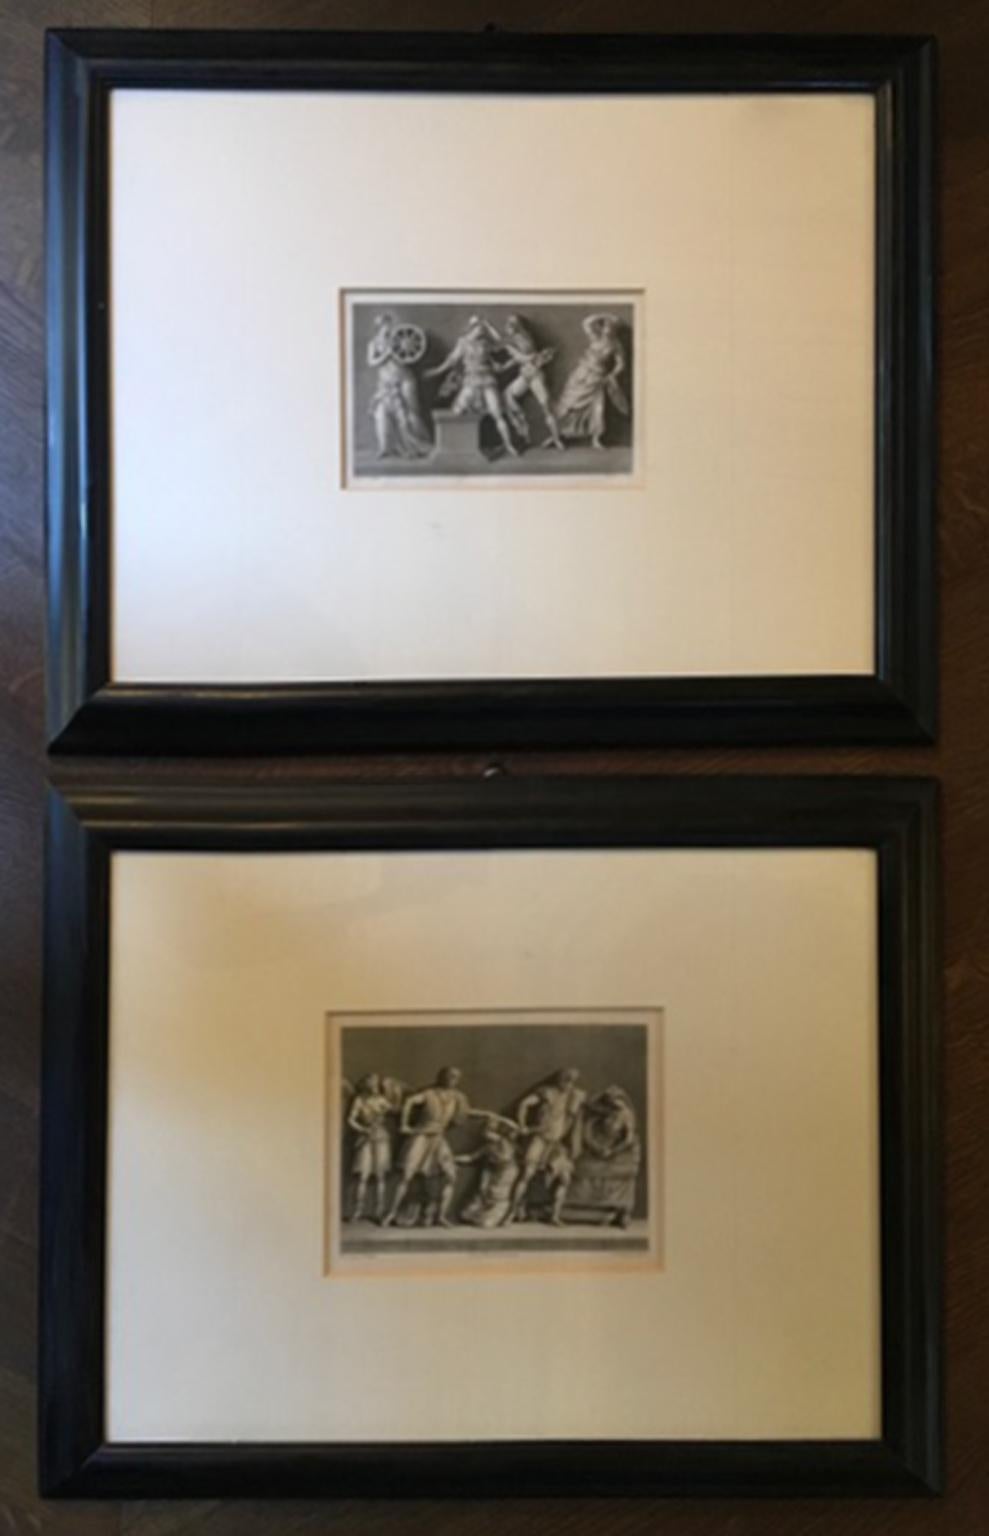 France Mid-19th century pair of Neoclassical black and white prints on paper by J.C.Ulmer

This beautiful pair of antique paper prints was engraved by the French J.C.Ulmer.
The Neoclassical subject has an timeless elegance. 

The wood black laquered